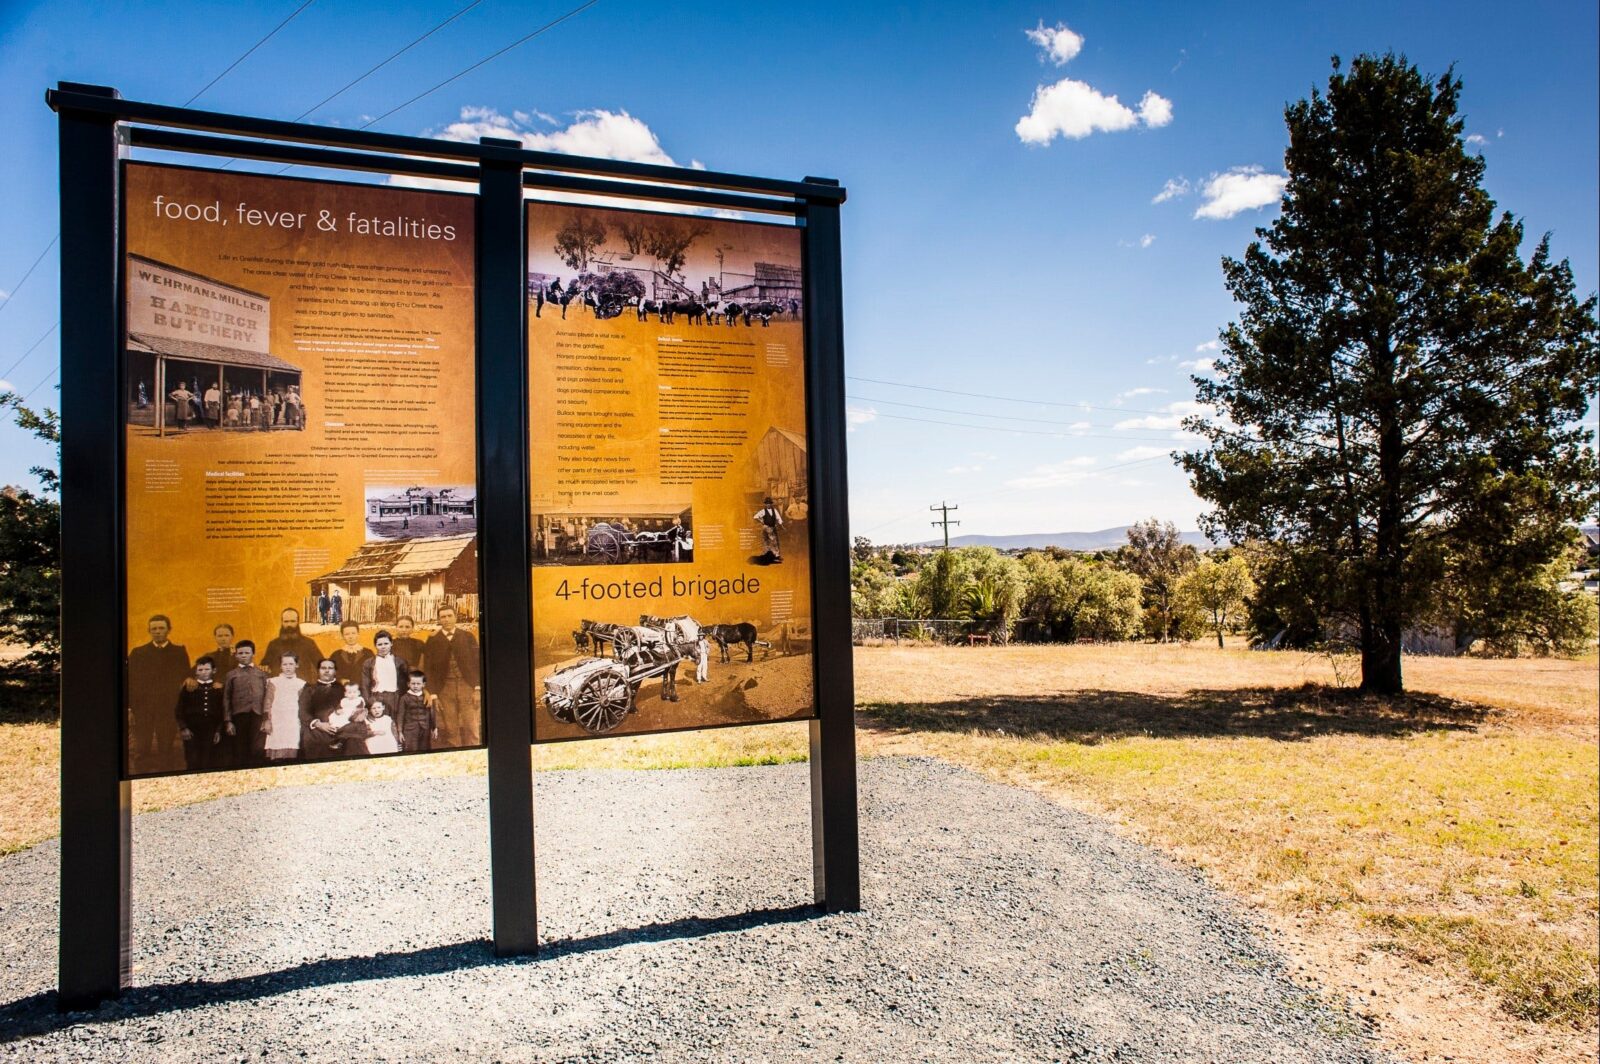 Interpretive signage at O'Brien's Hill Grenfell